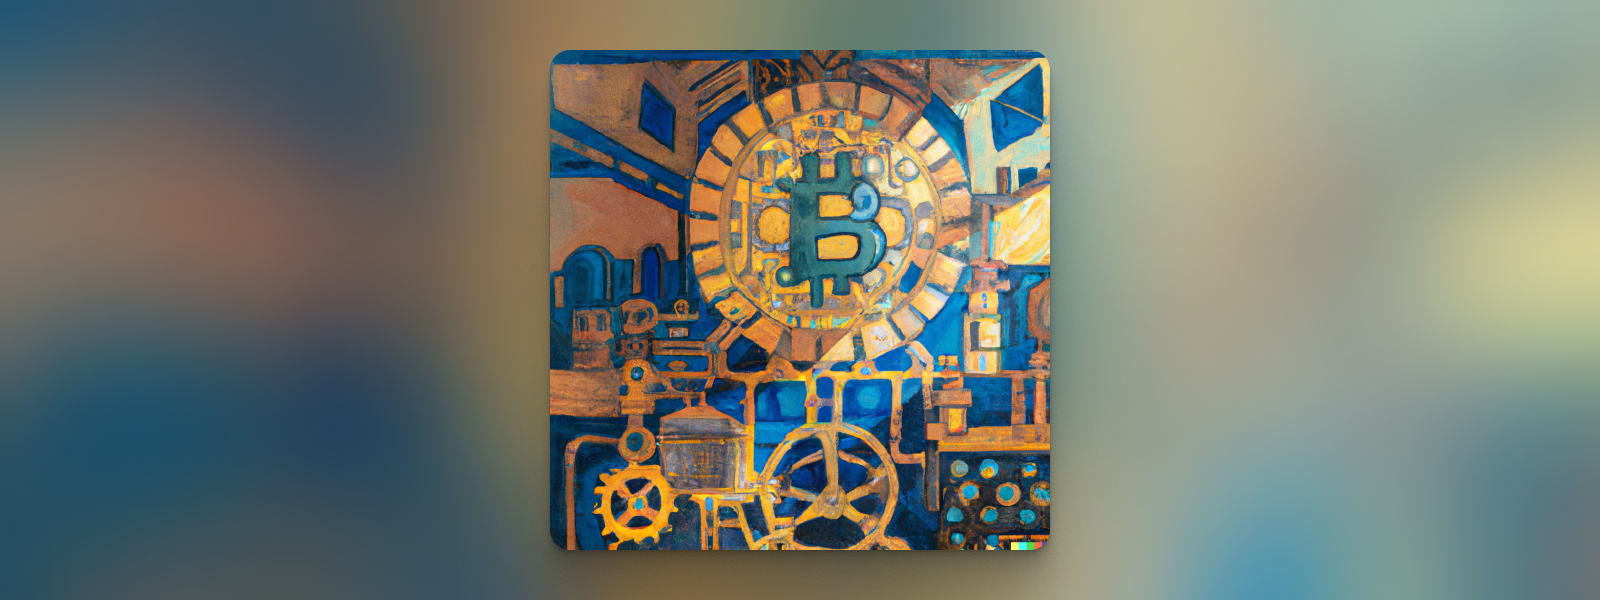 An oil painting of a big, clunky machine with a big bitcoin gear